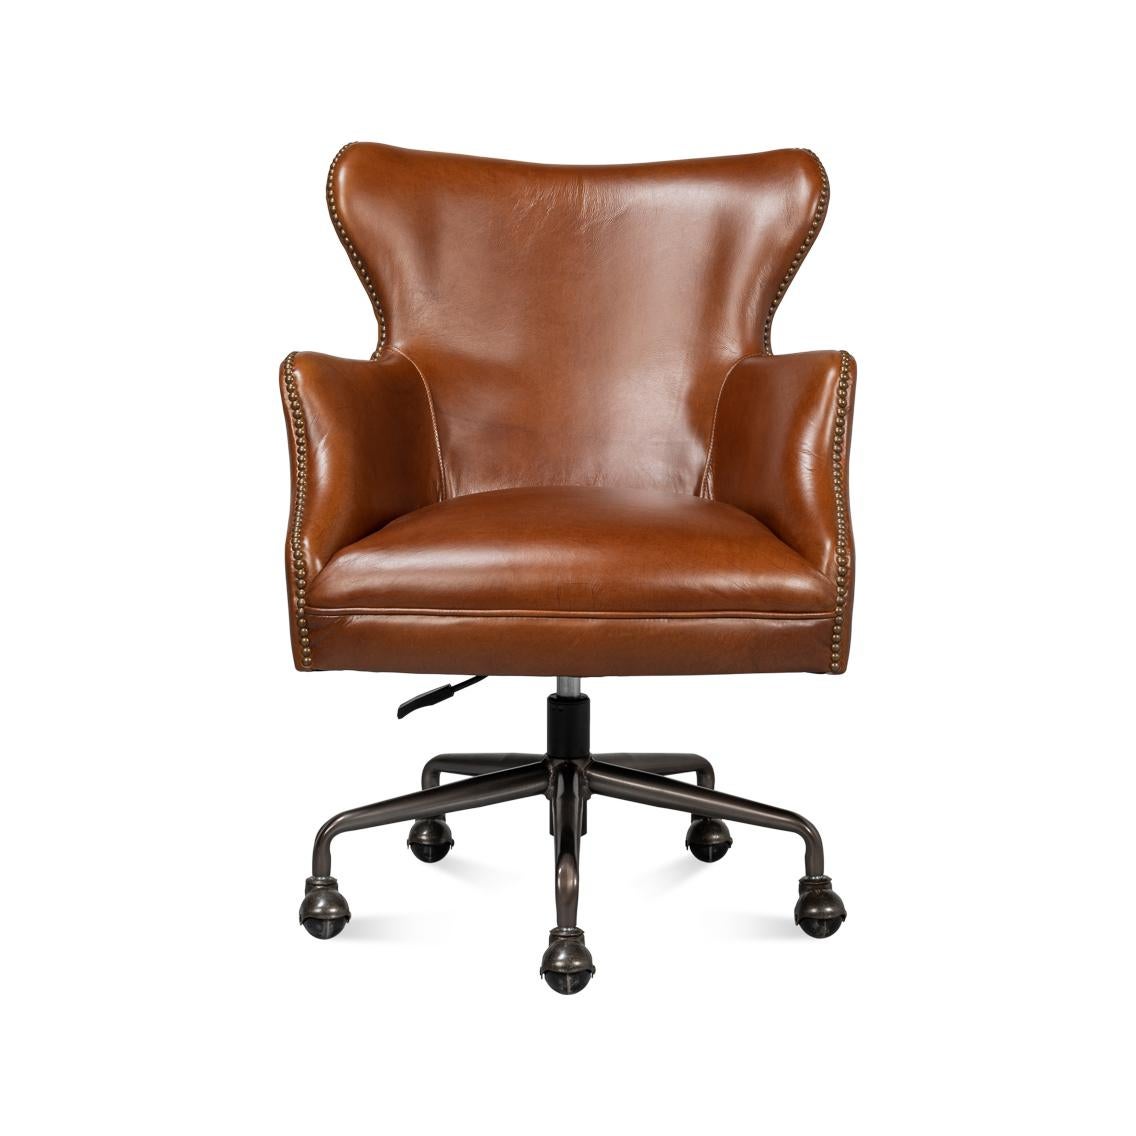 A modern brown leather desk chair with brass nailhead trim. A truly timeless classic style crafted in rich brown leather. This practical and functional chair will elevate the look and feel of any office while you work in comfort. 

Made of